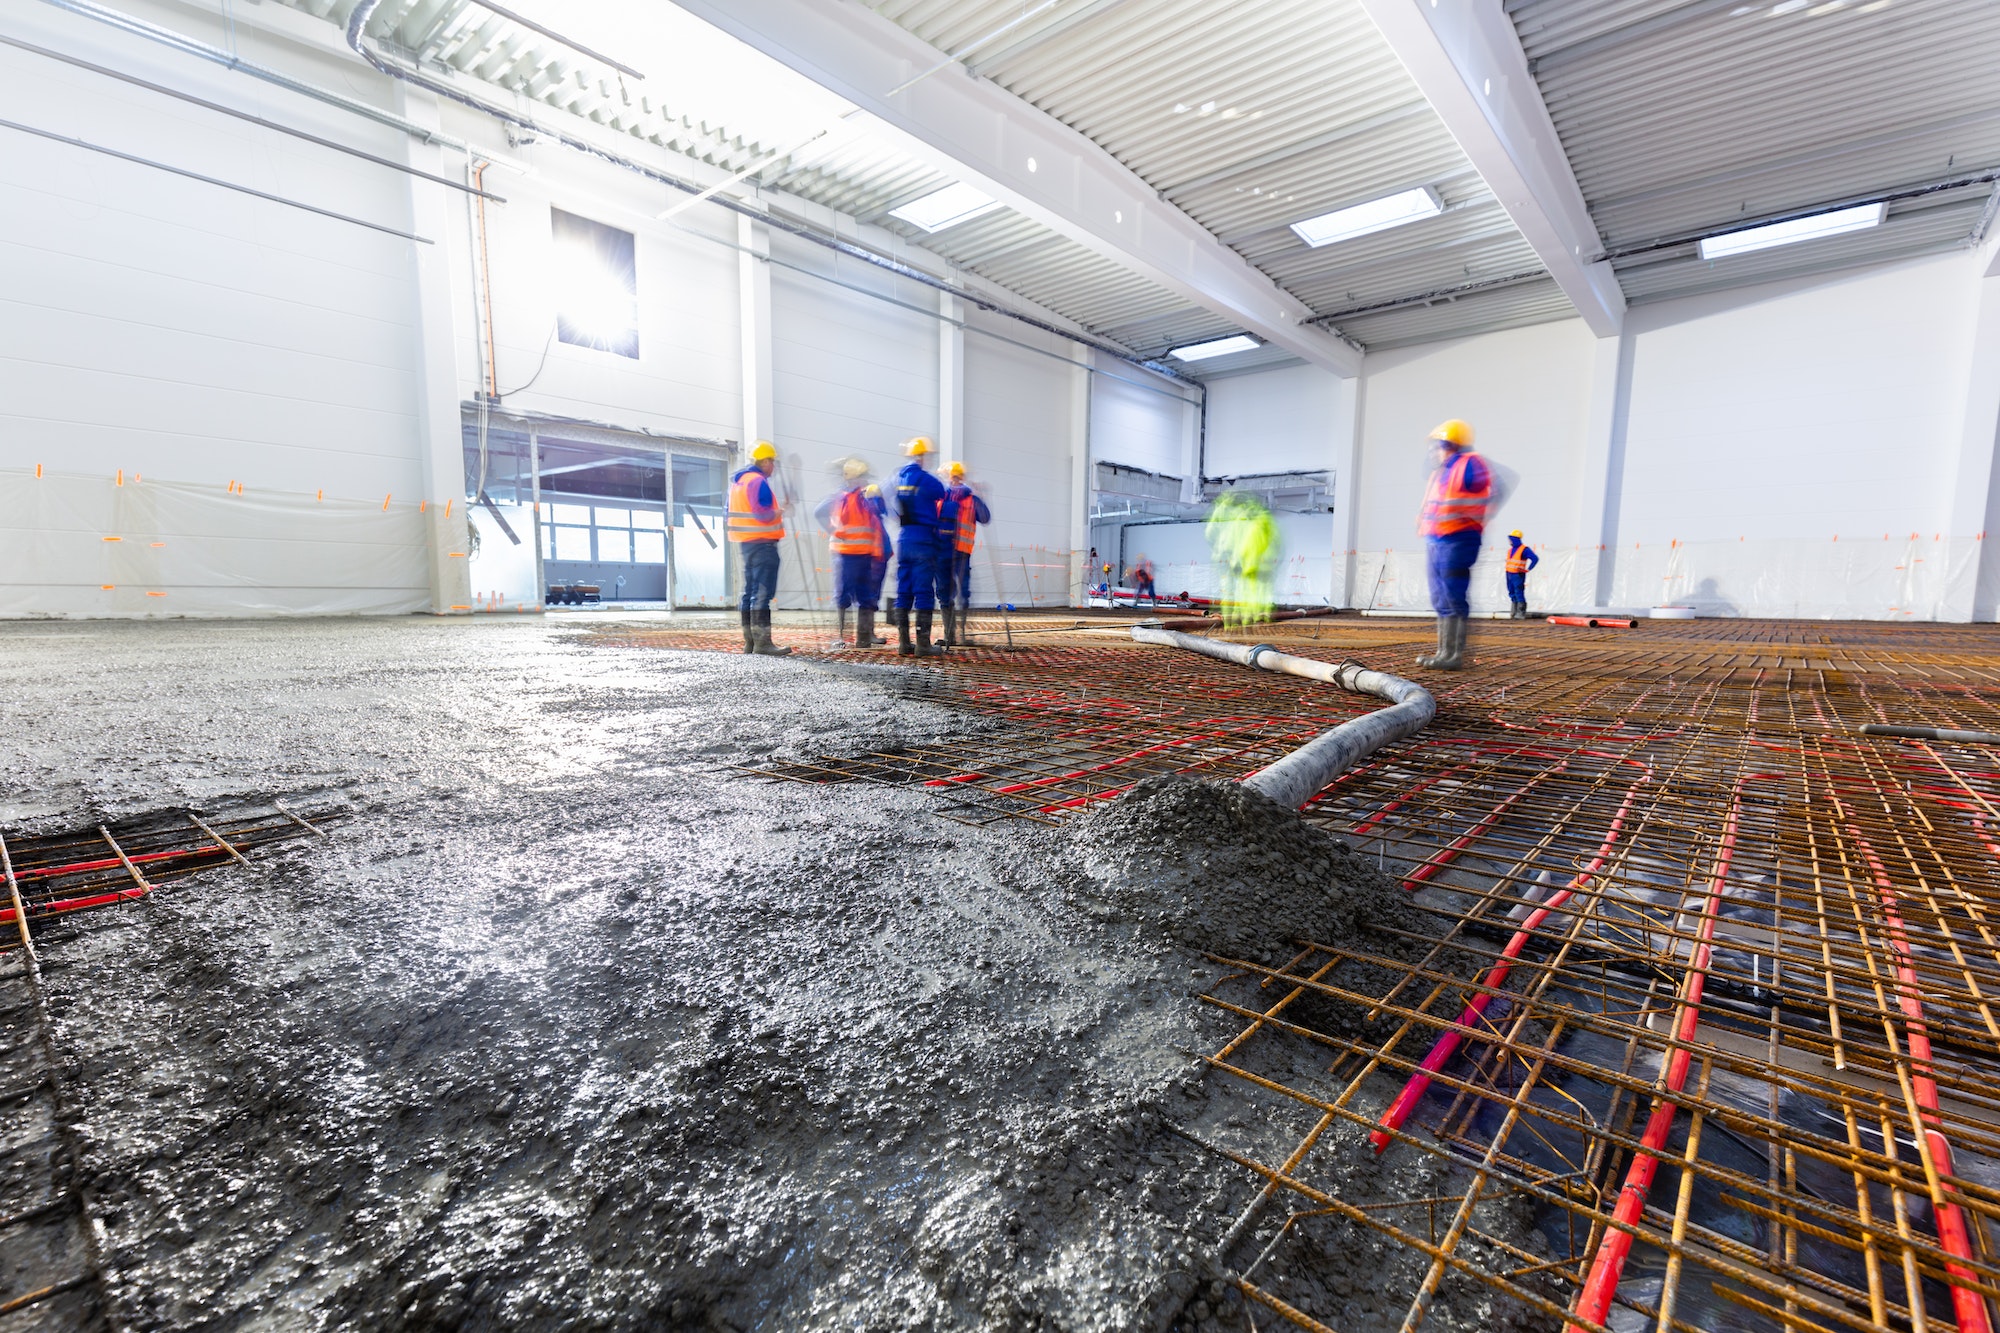 Workers do concrete screed on floor with heating in a new warehouse building